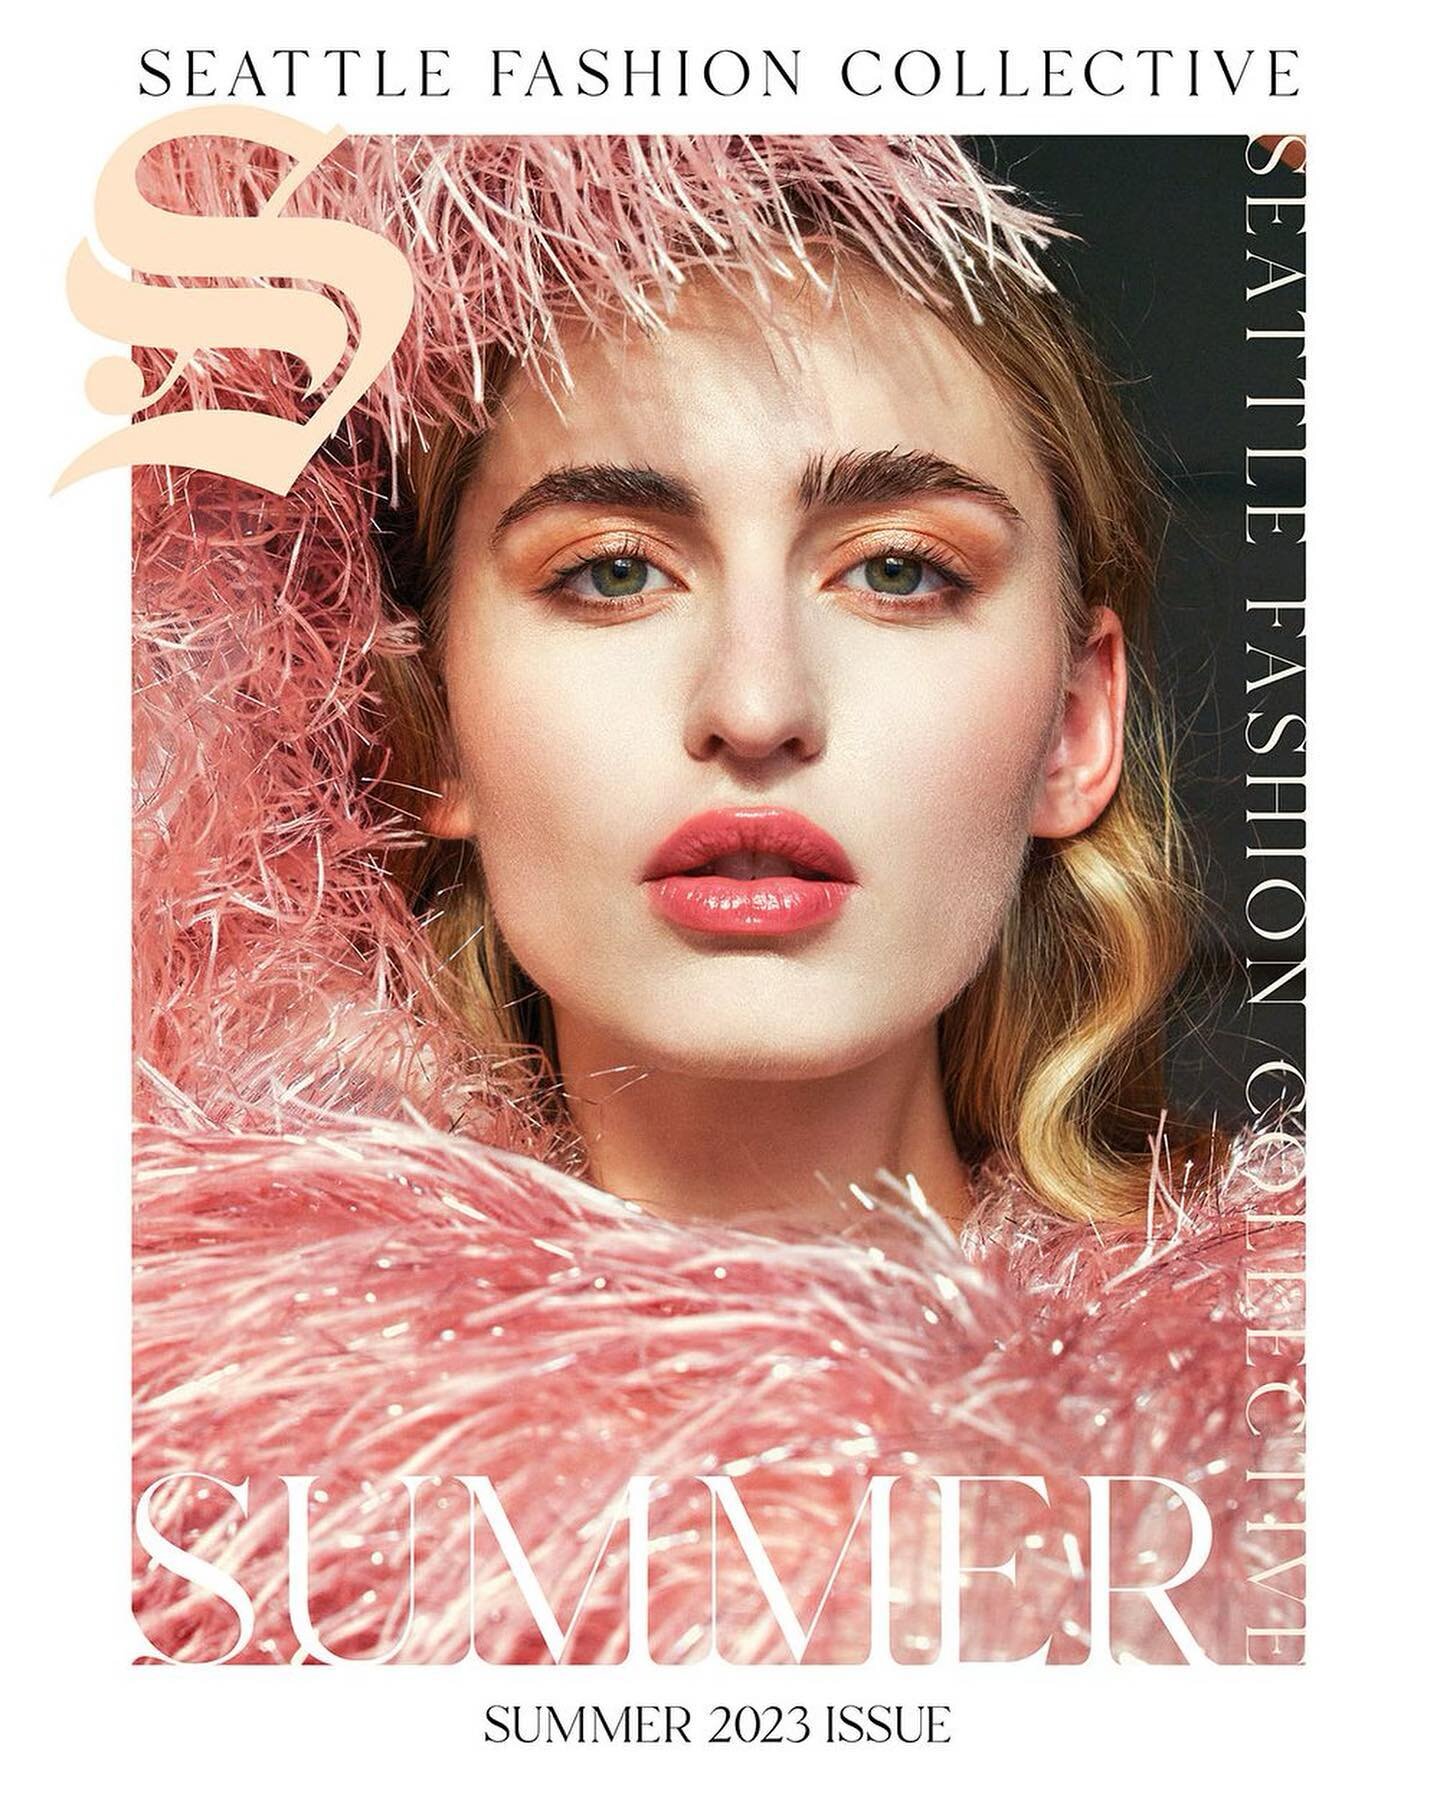 Summer 2023 Issue☀️

Northwest stories.  Northwest fashion.  Made with 💕 in the Pacific Northwest.

Did we mention Northwest?

Fashion editorials.  Designer interviews.  Celebration of life.  140 pages of summertime goodness that's literally history